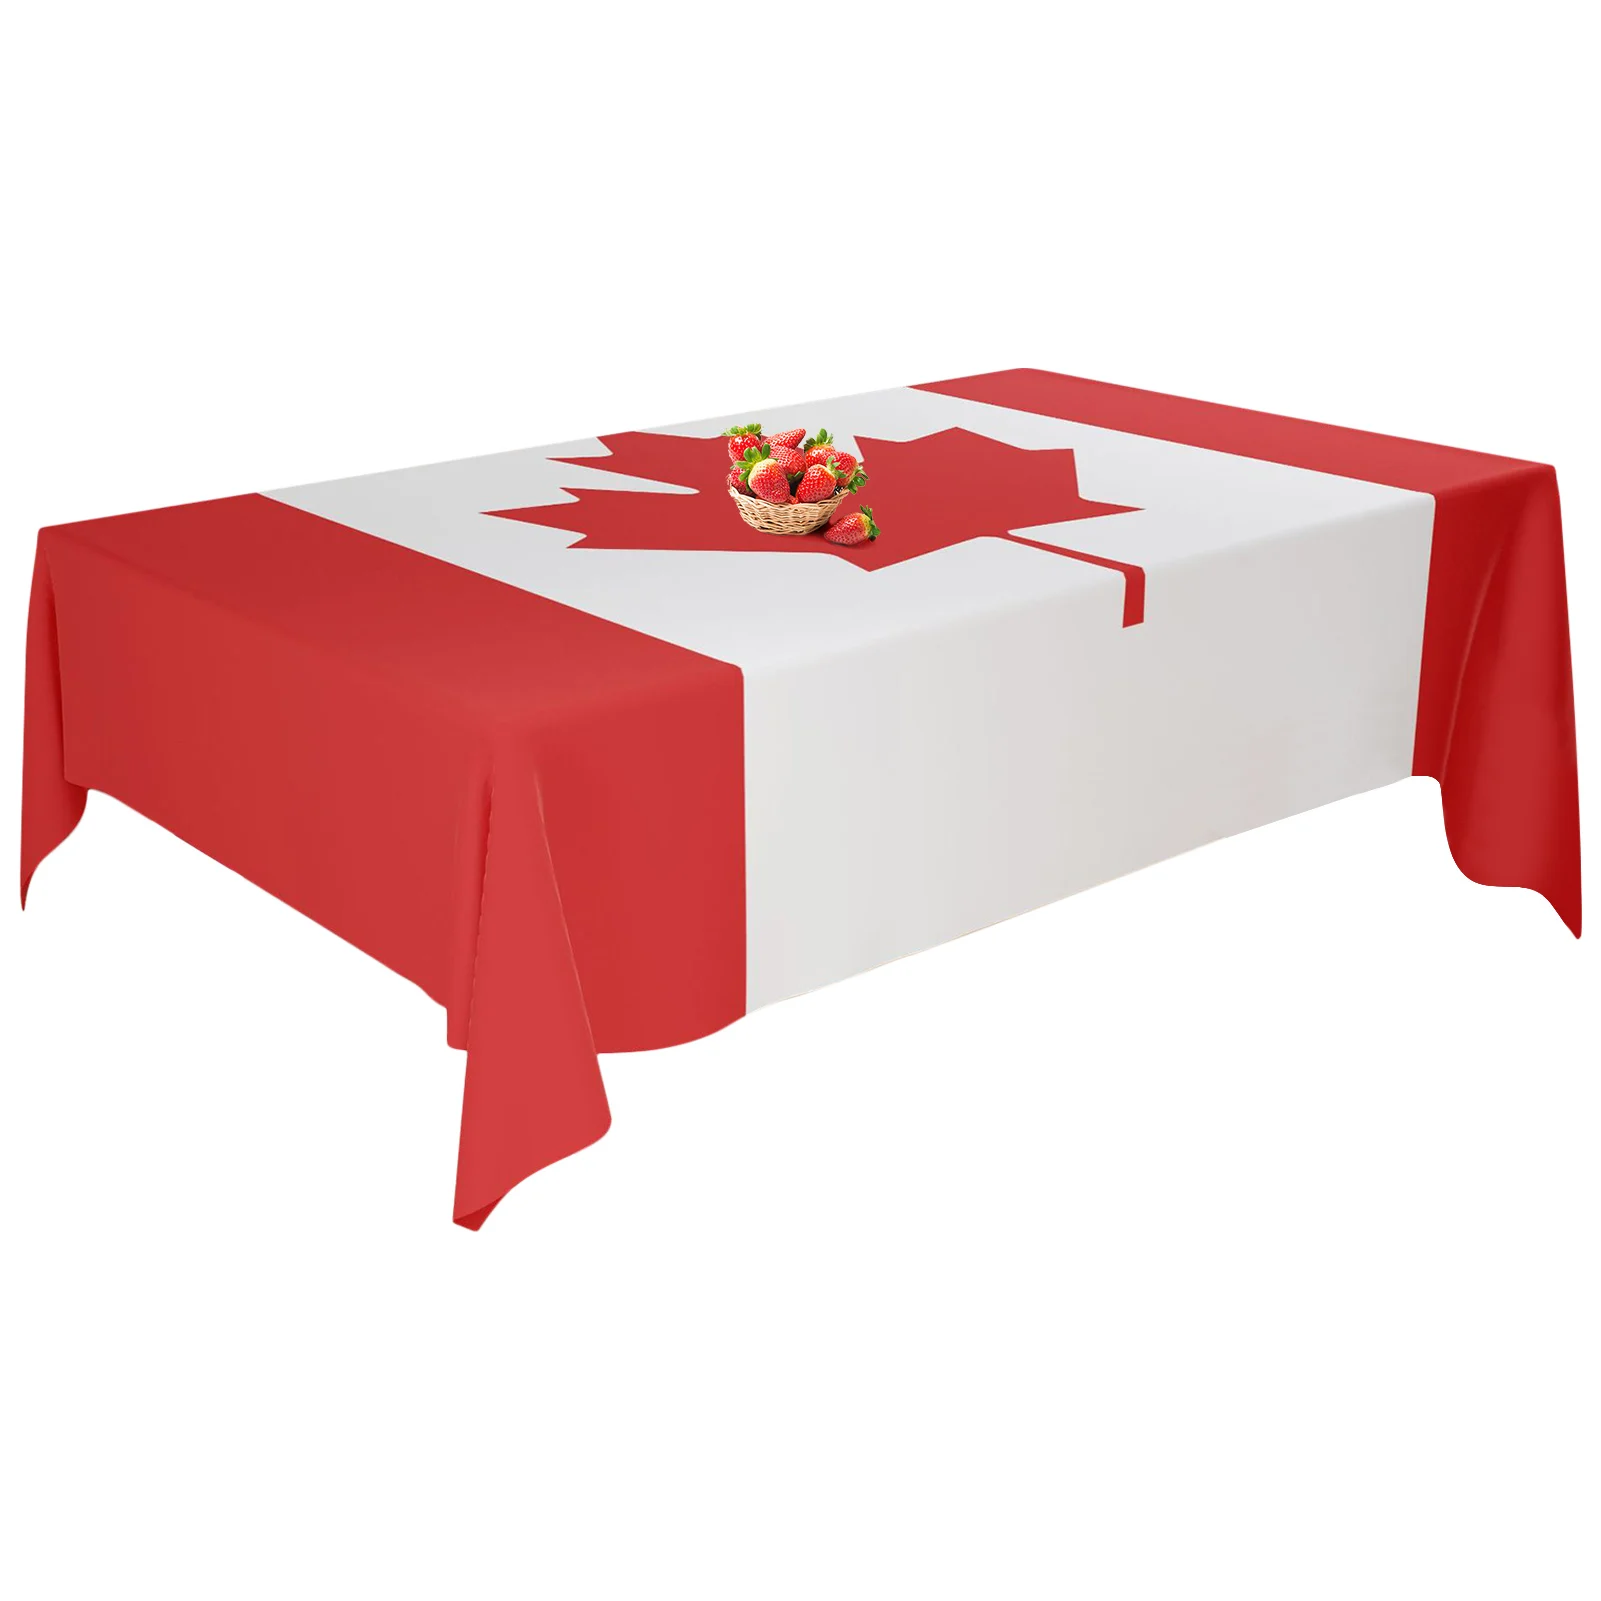 

Canada Maple Leaf Table Cloth Canada Flag Table Cloth For National Day Patriotic Table Decorations For National Day Dinner Party